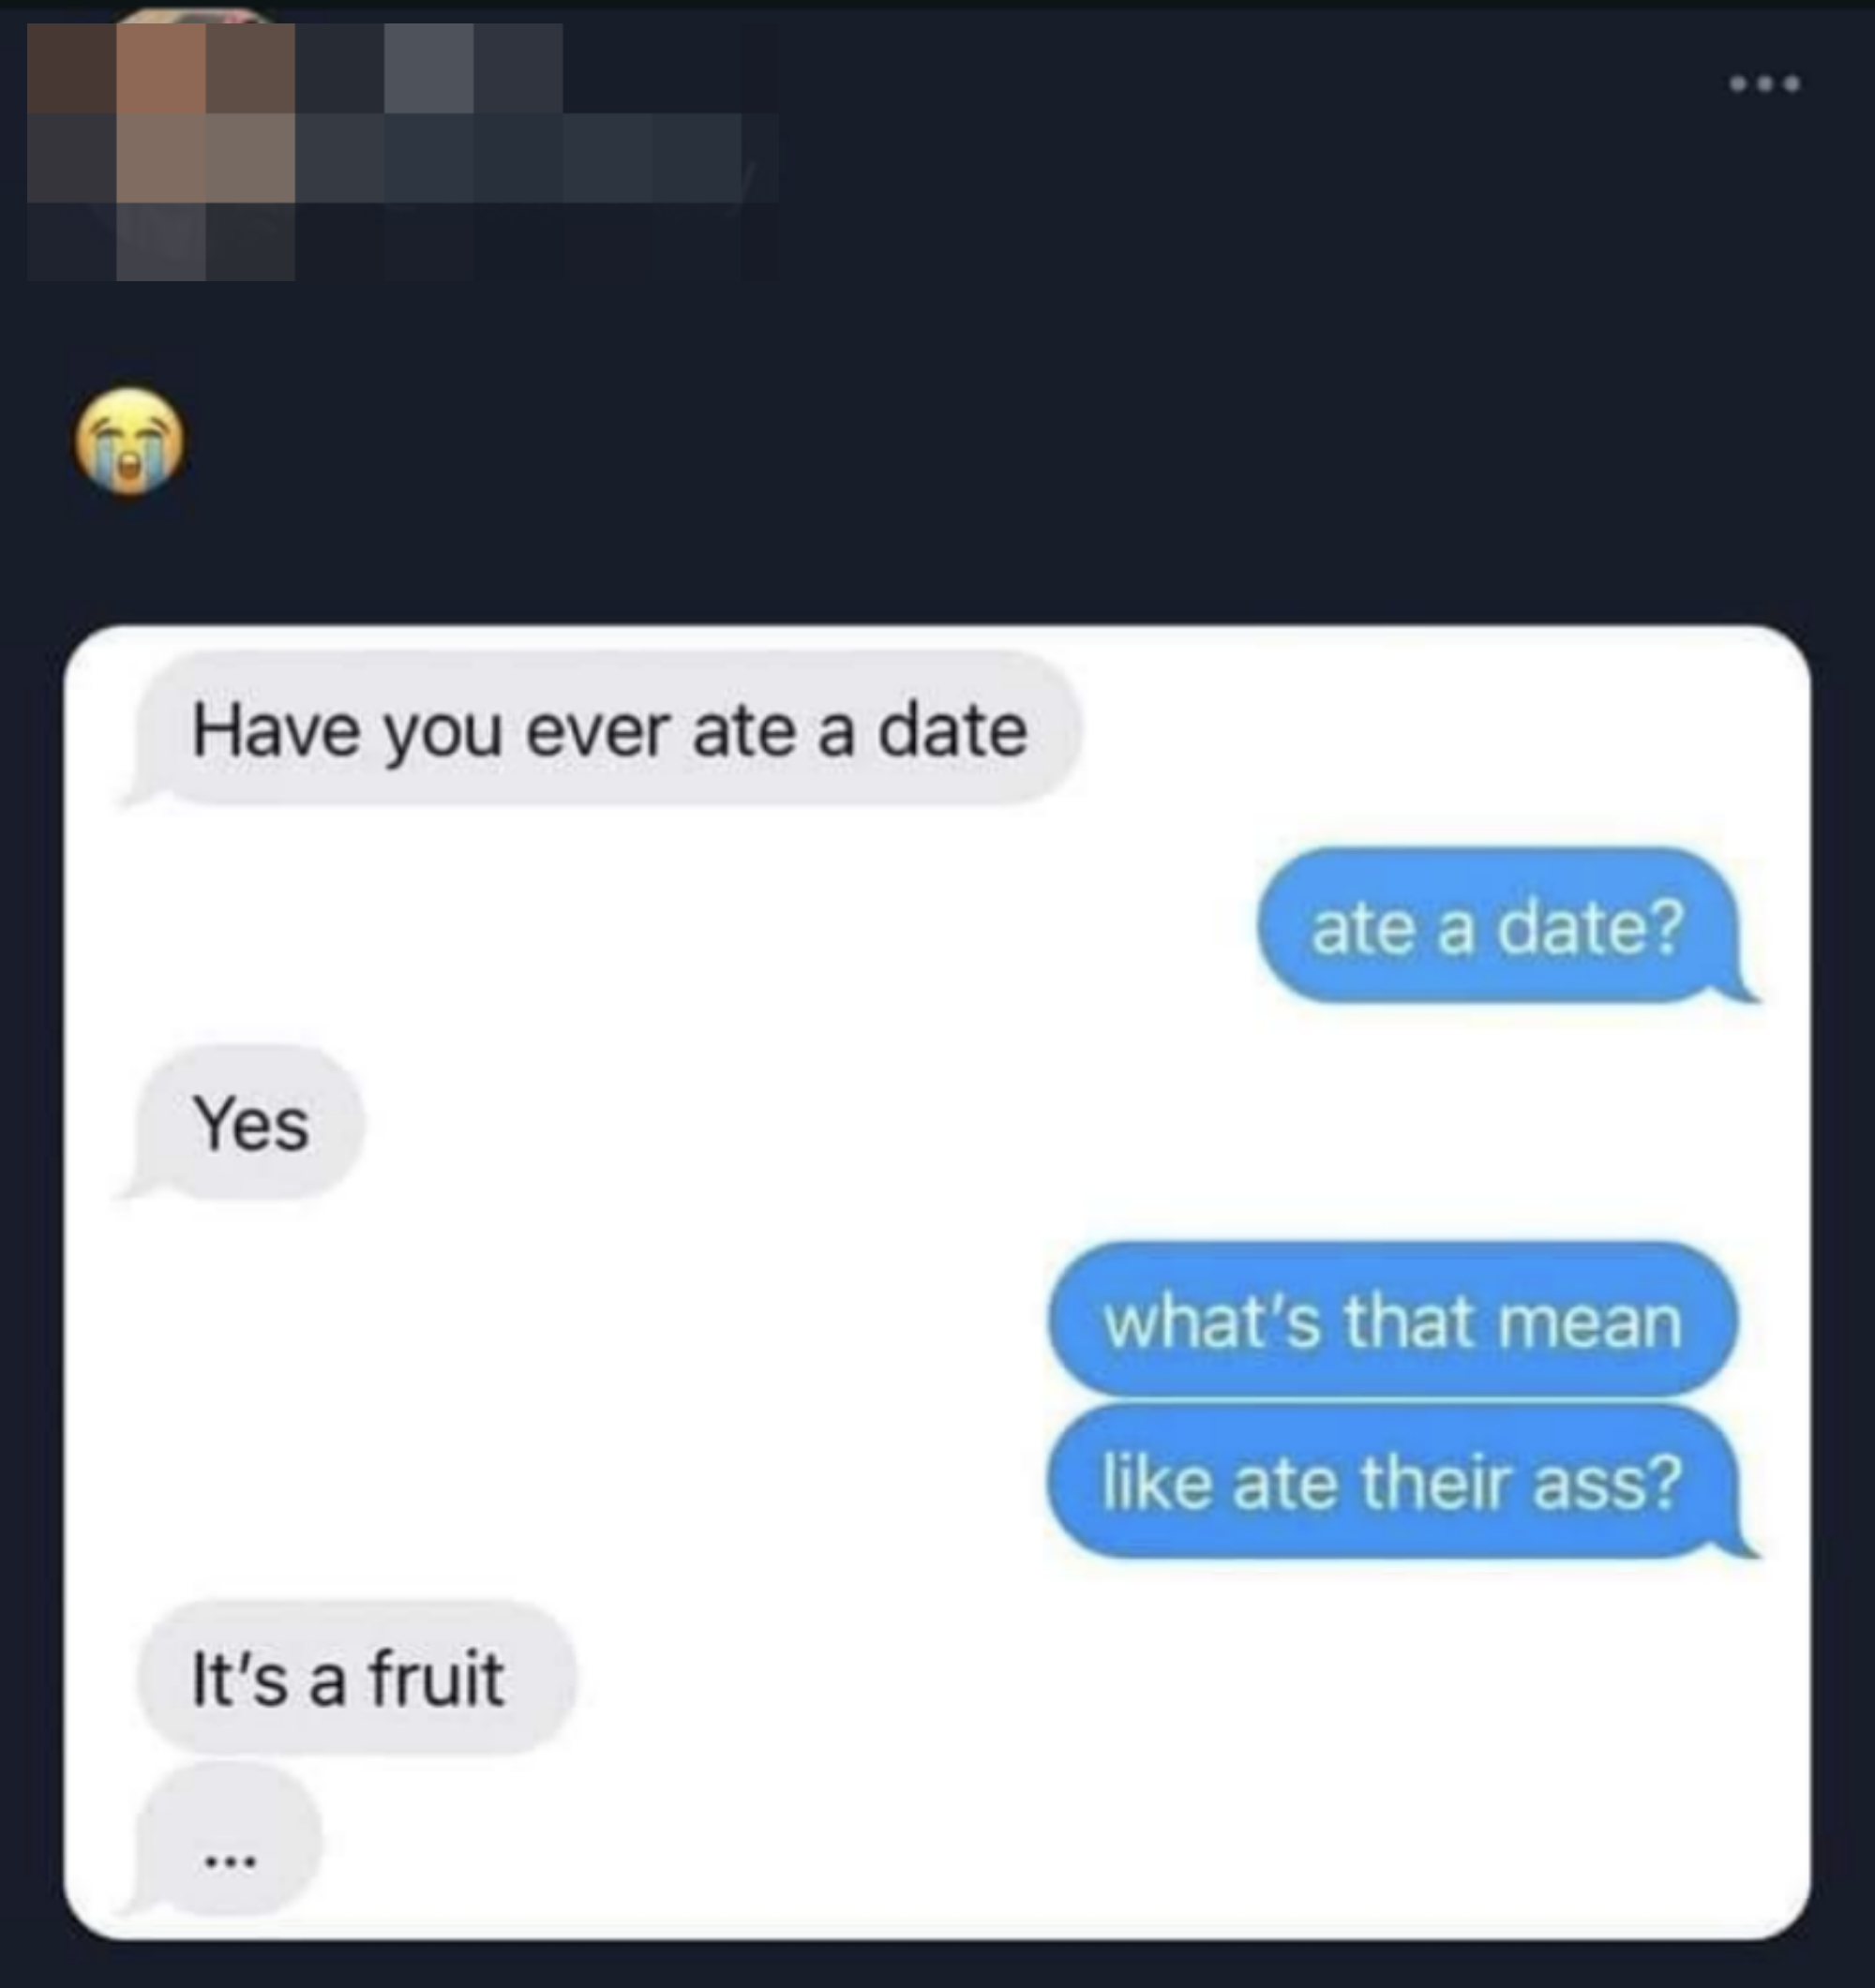 have you ever ate a date, and other person asks, like ate their ass?